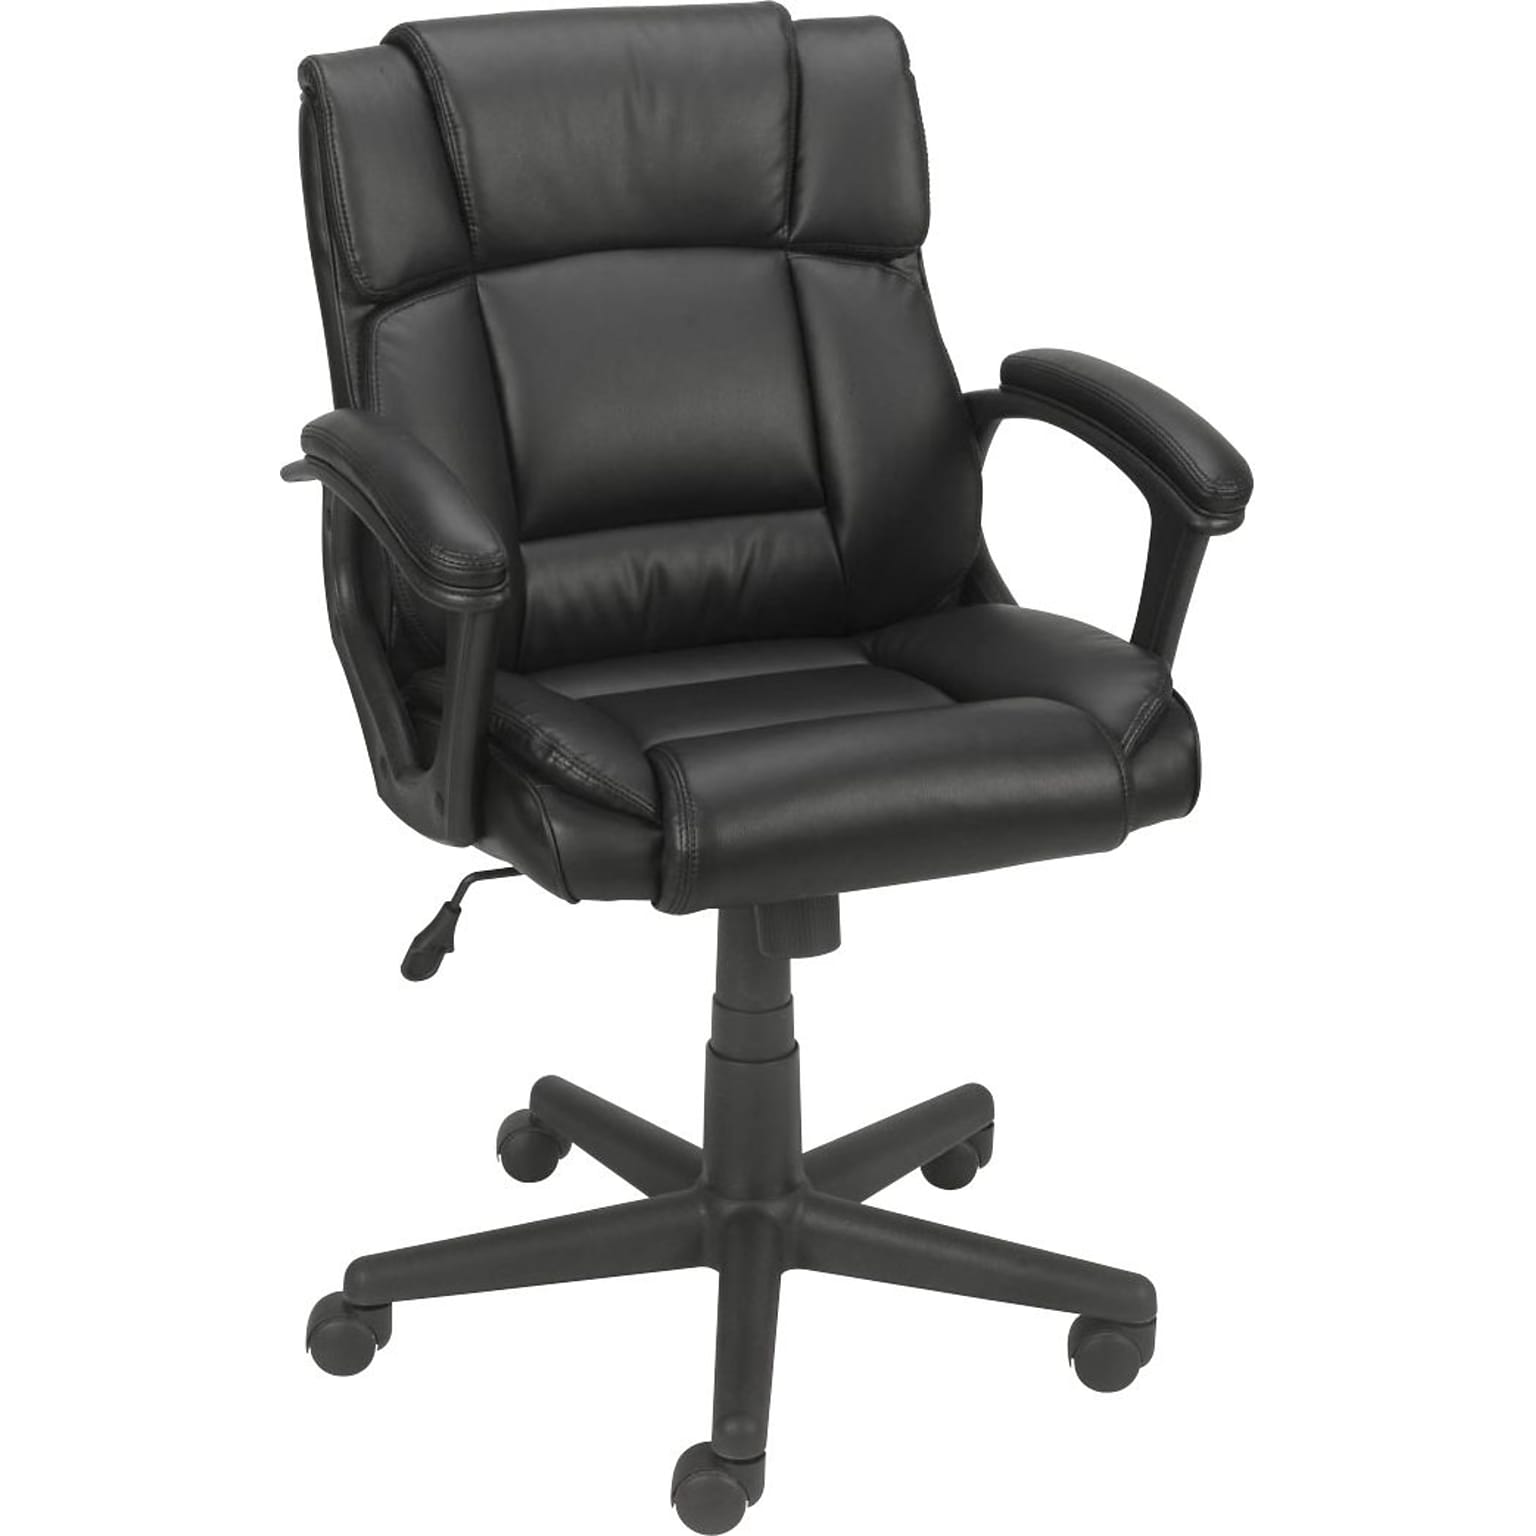 Buy 1 Get 1 Free Quill Brand® Montessa II Luxura Faux Leather Computer and Desk Chair, Black